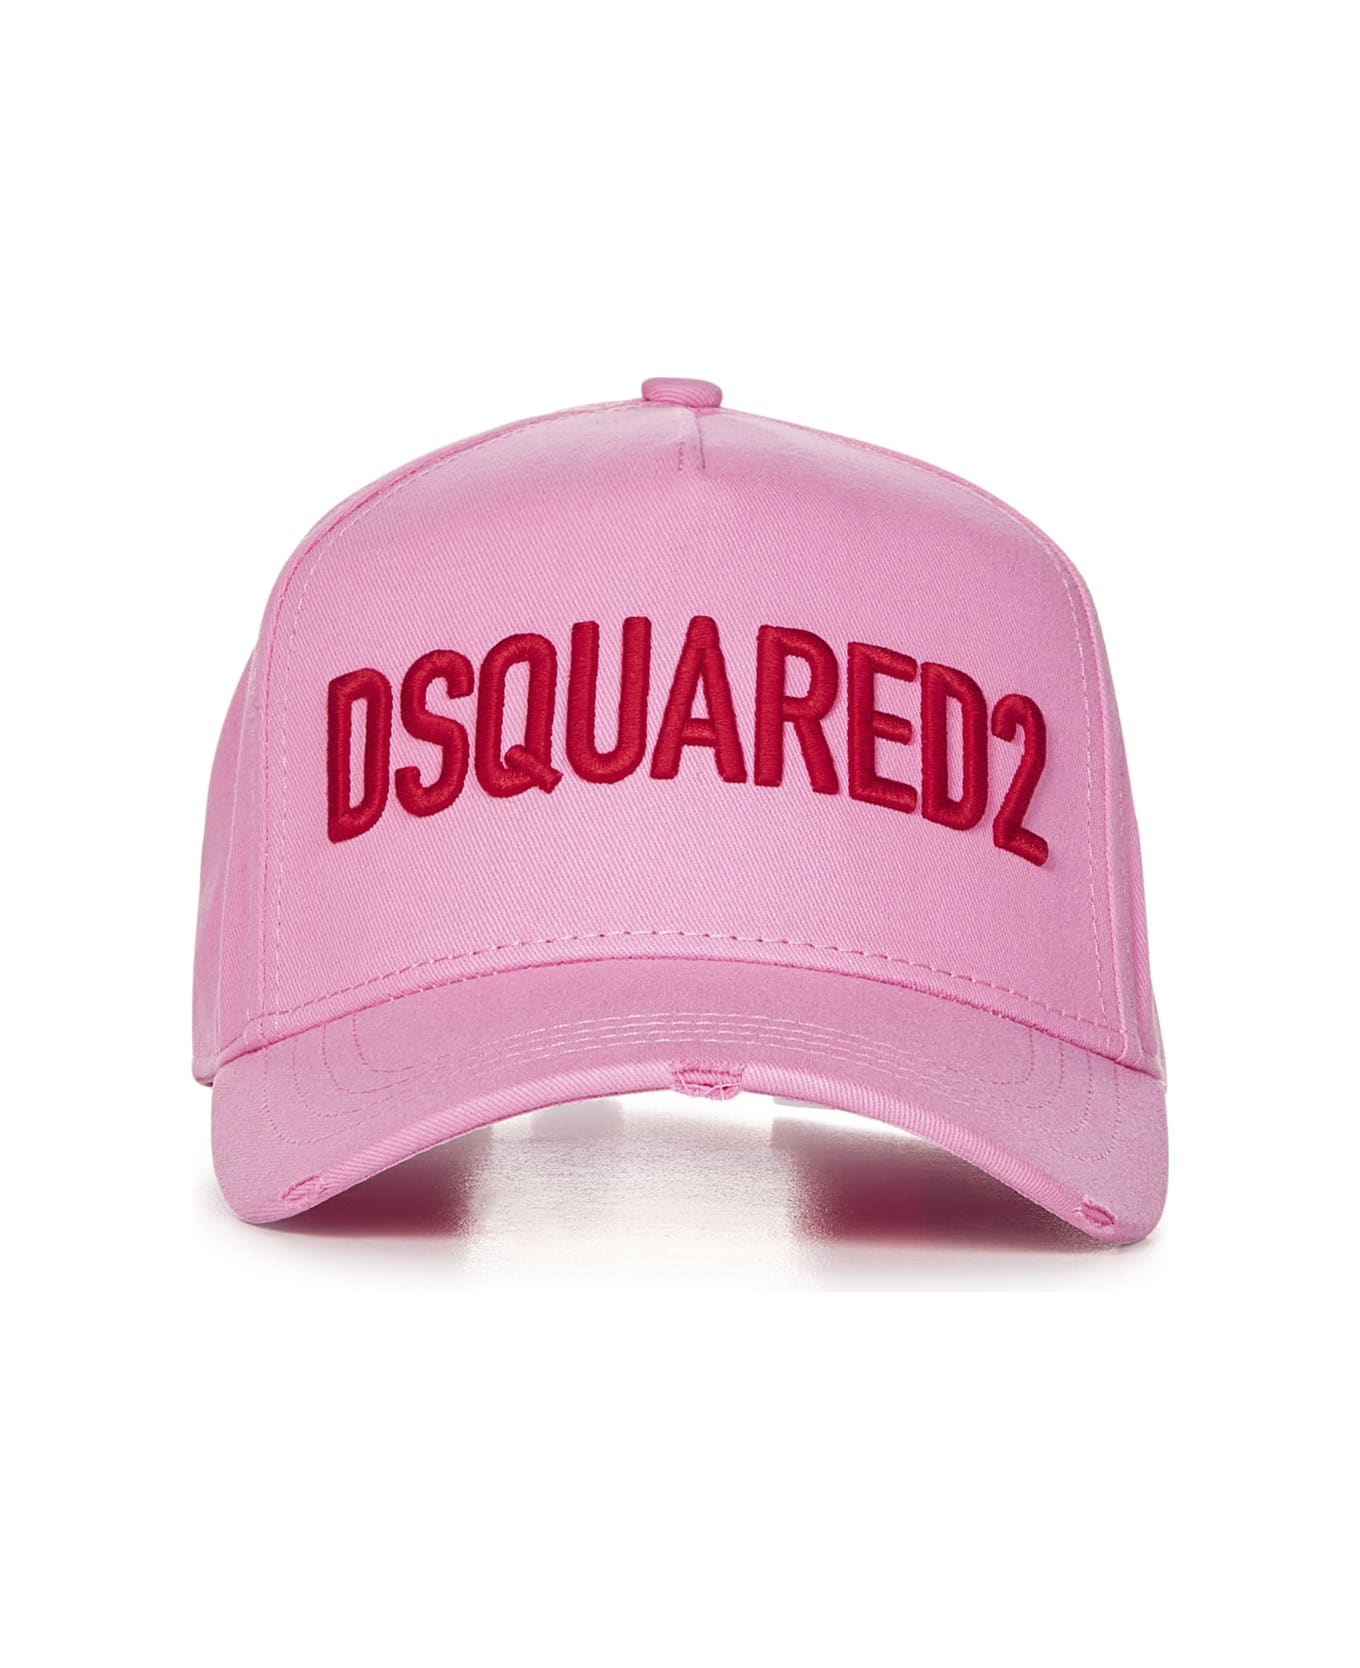 Dsquared2 Dquared2 Hat - Pink